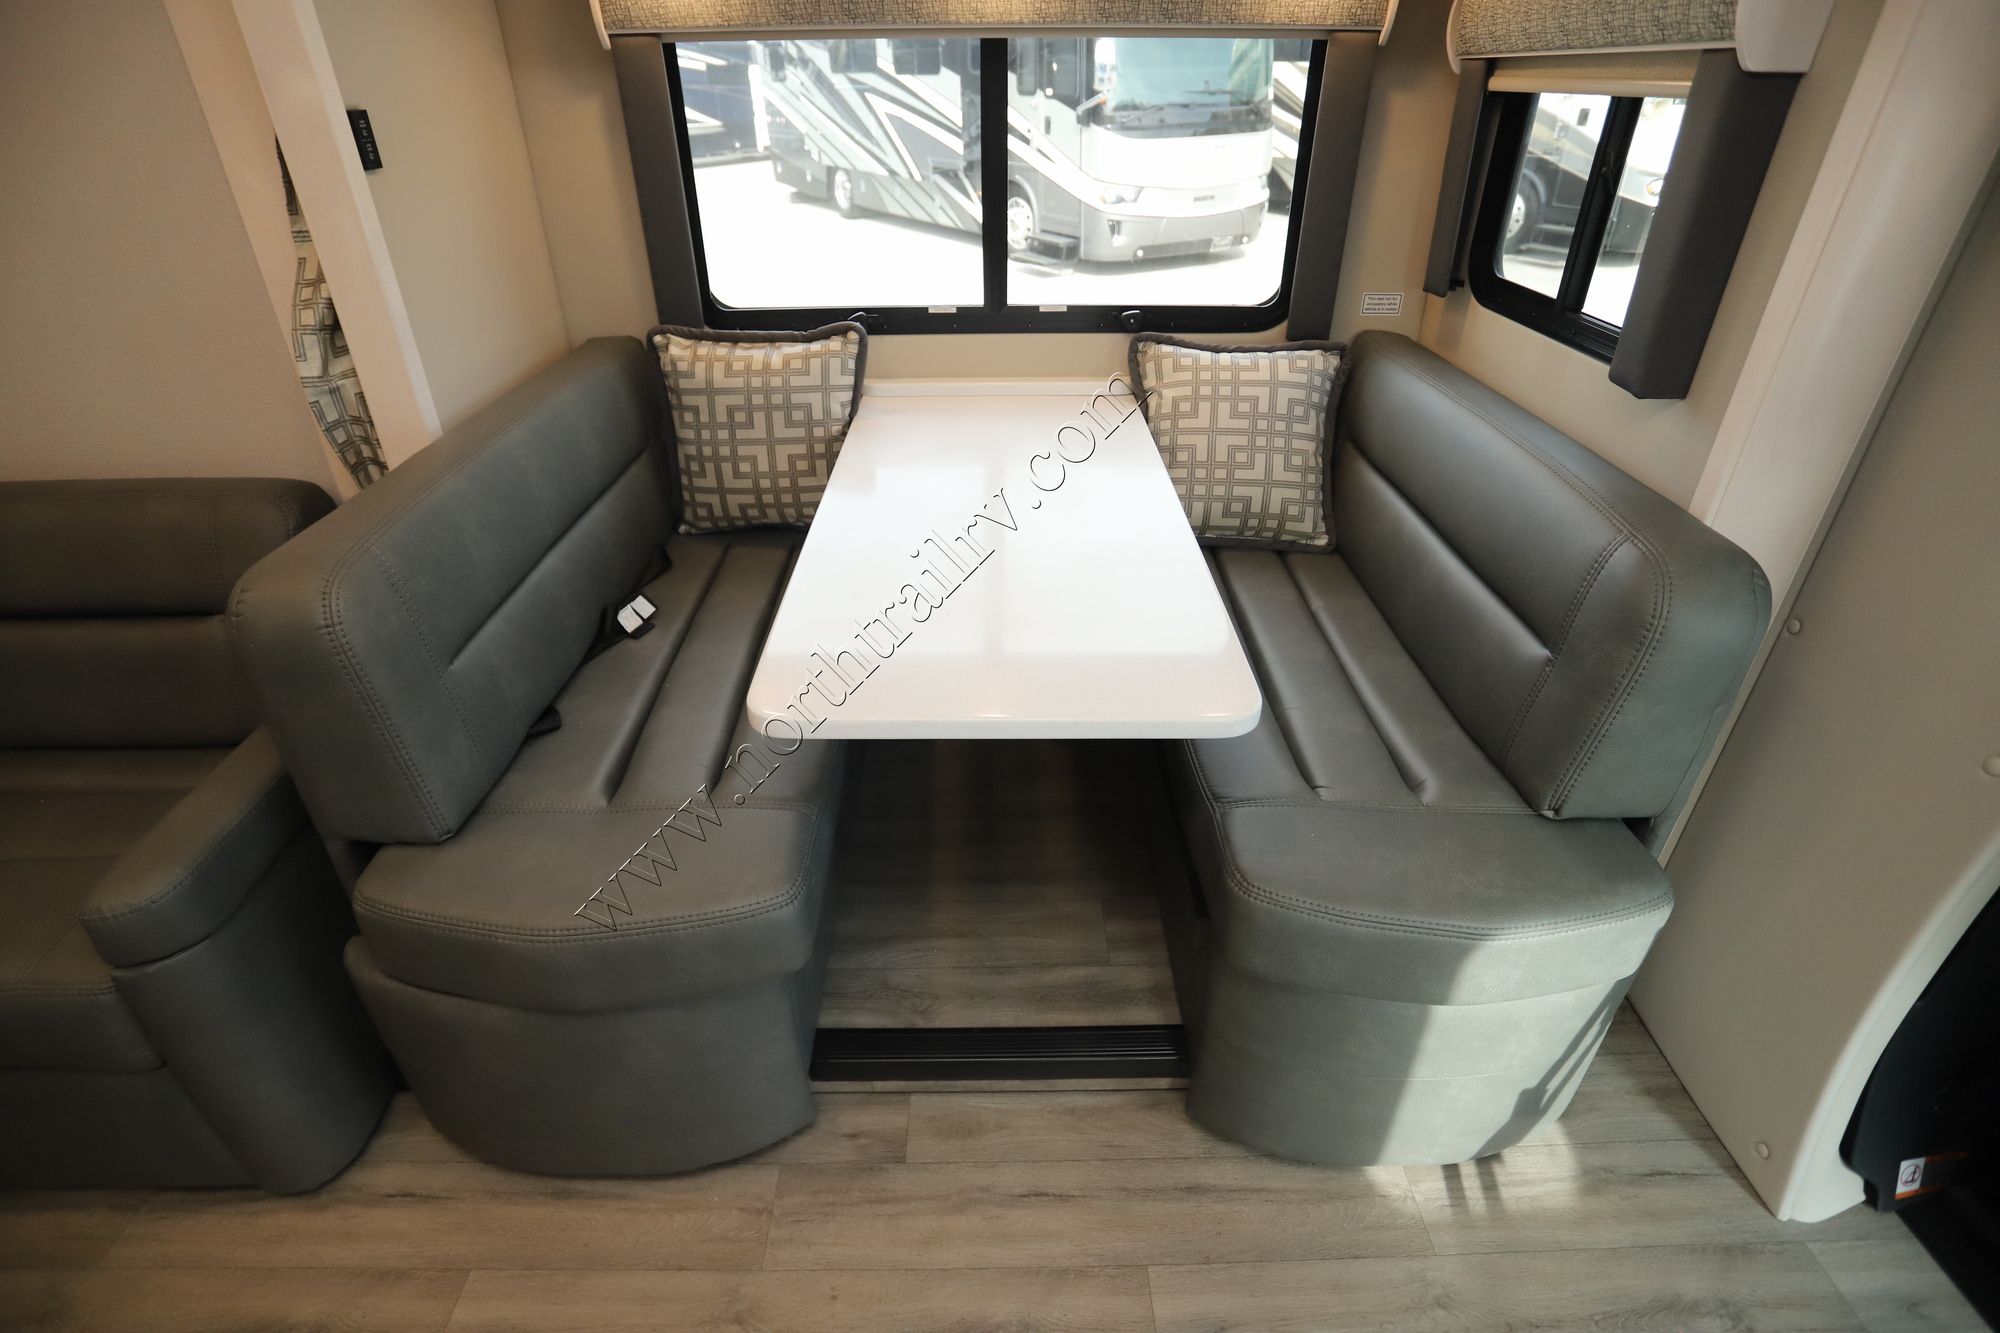 New 2023 Renegade Rv Vienna 25VRMC Class C  For Sale